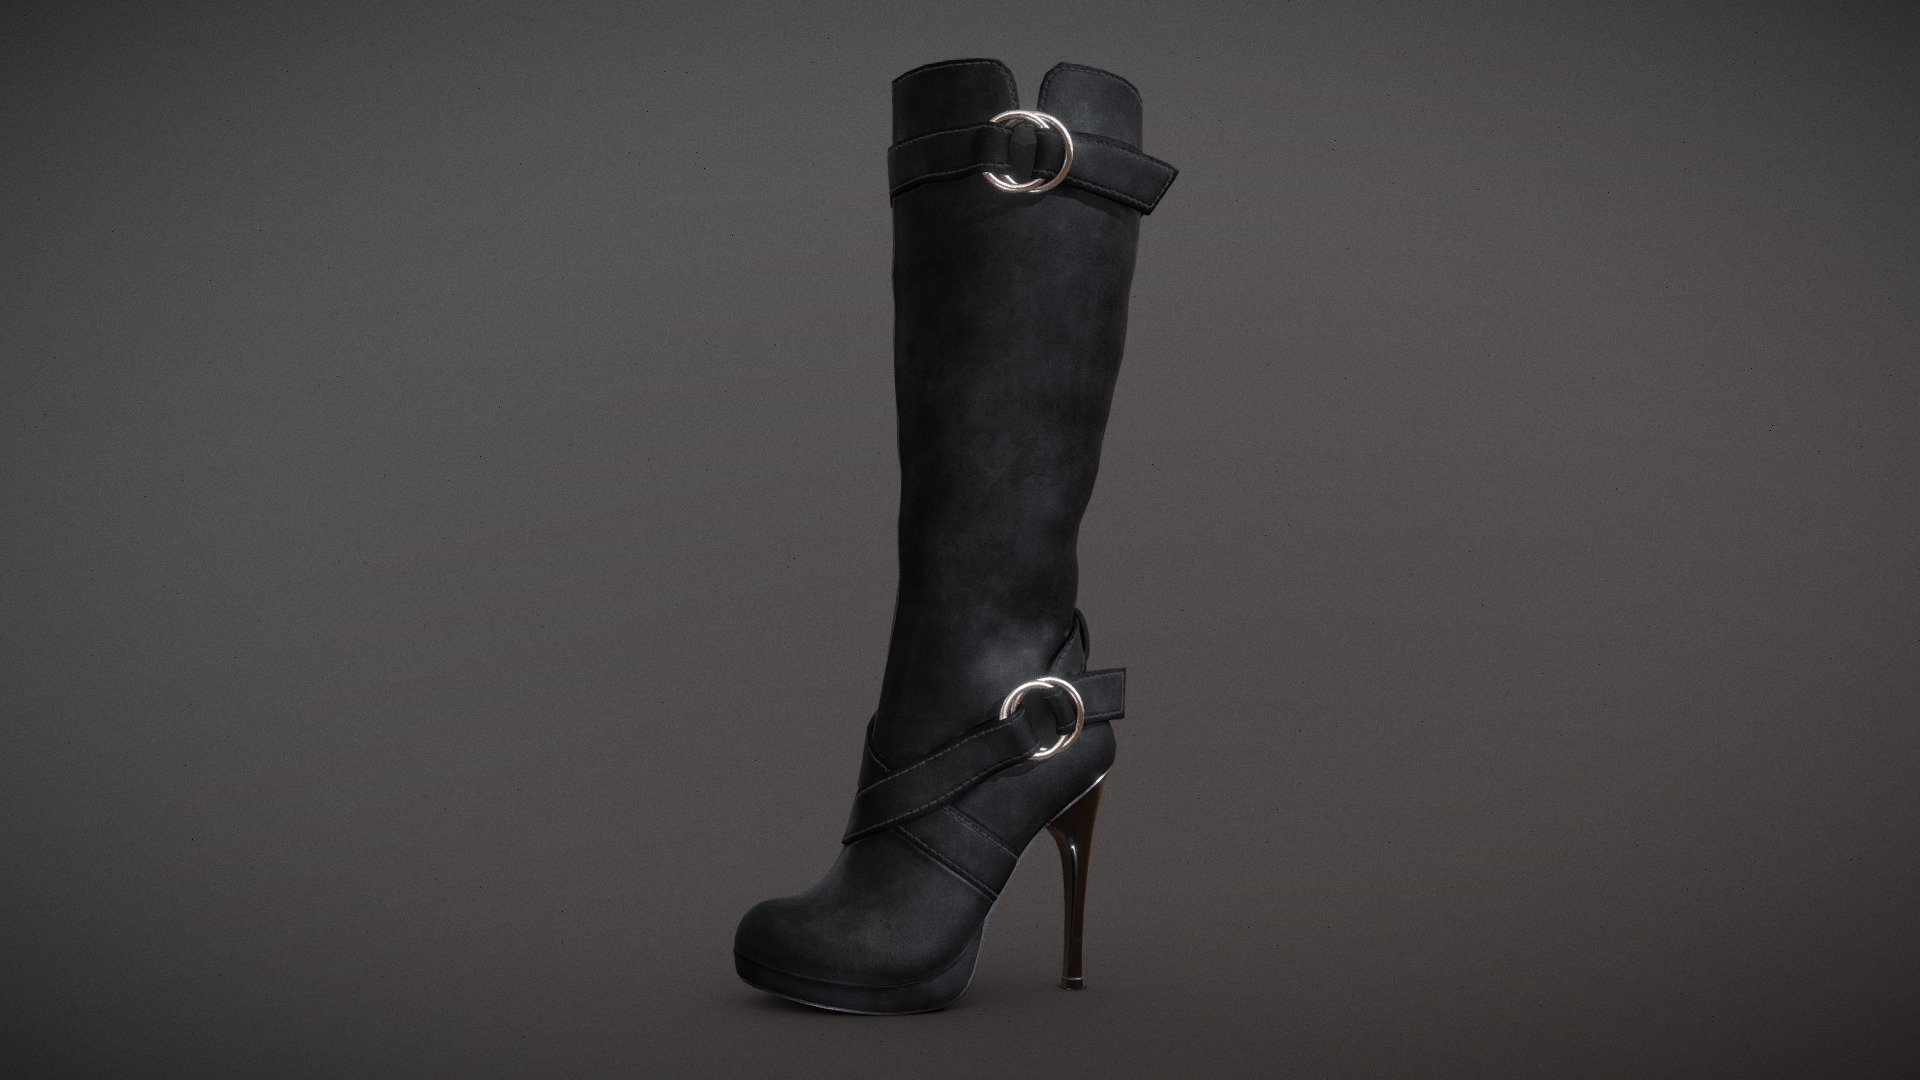 Knee High, High Heels Suede Boots

Game and production ready, polycount optimized for quality, ideal for high quality Characters and Close-Ups
Internal parts modeled and textured, ideal for customization or animation

Single UV space
PBR and UE4 4k Textures
Low Poly has 5.4k quads
FBX, OBJ, ZTL

Includes 3 Color Variations
Black / Brown / Grey - Knee High, High Heels Suede Boots - Buy Royalty Free 3D model by Feds452 3d model